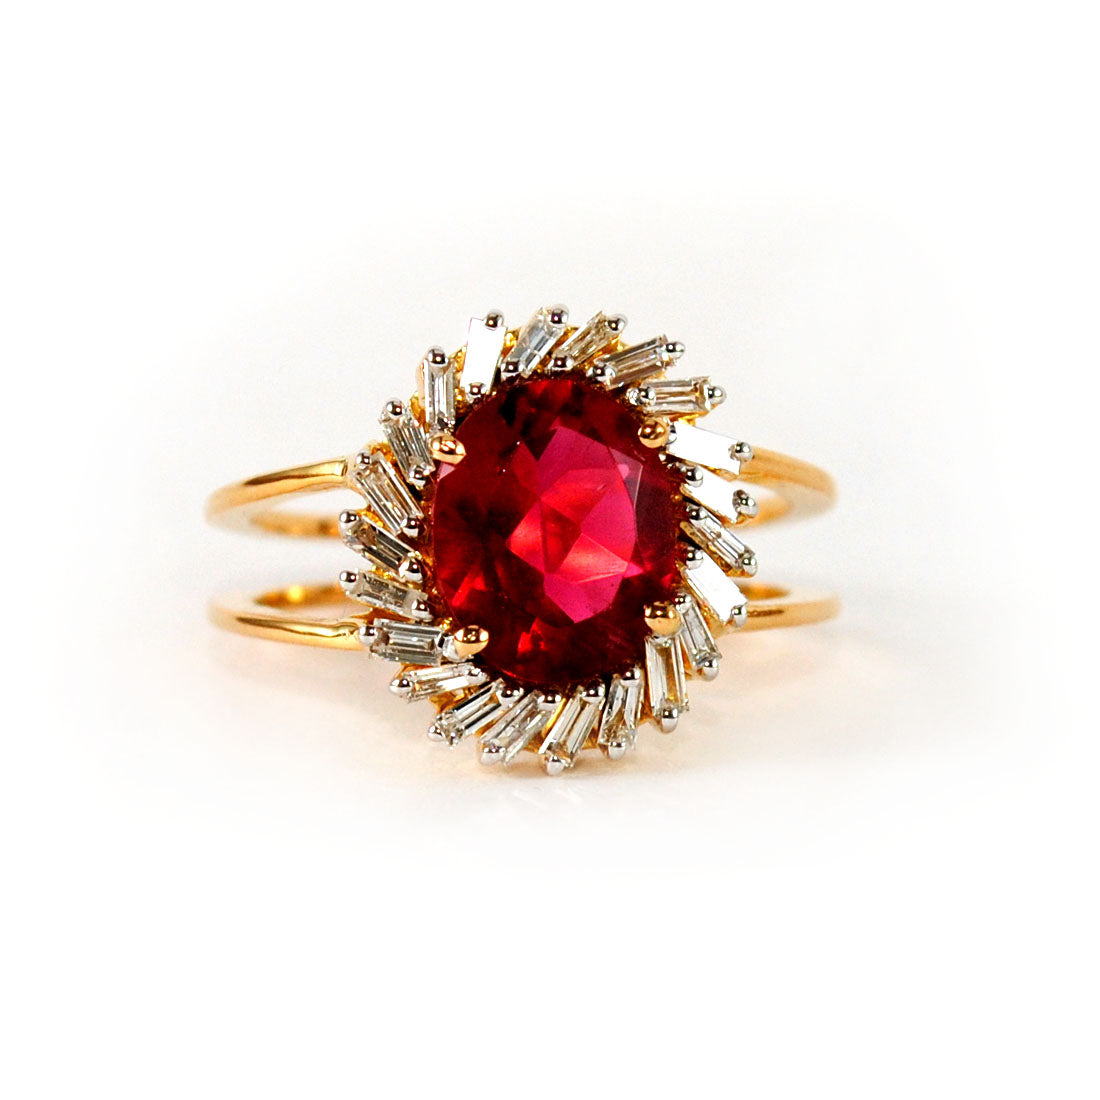 Baguette Diamond Ring with Oval Ruby center with Double Shank